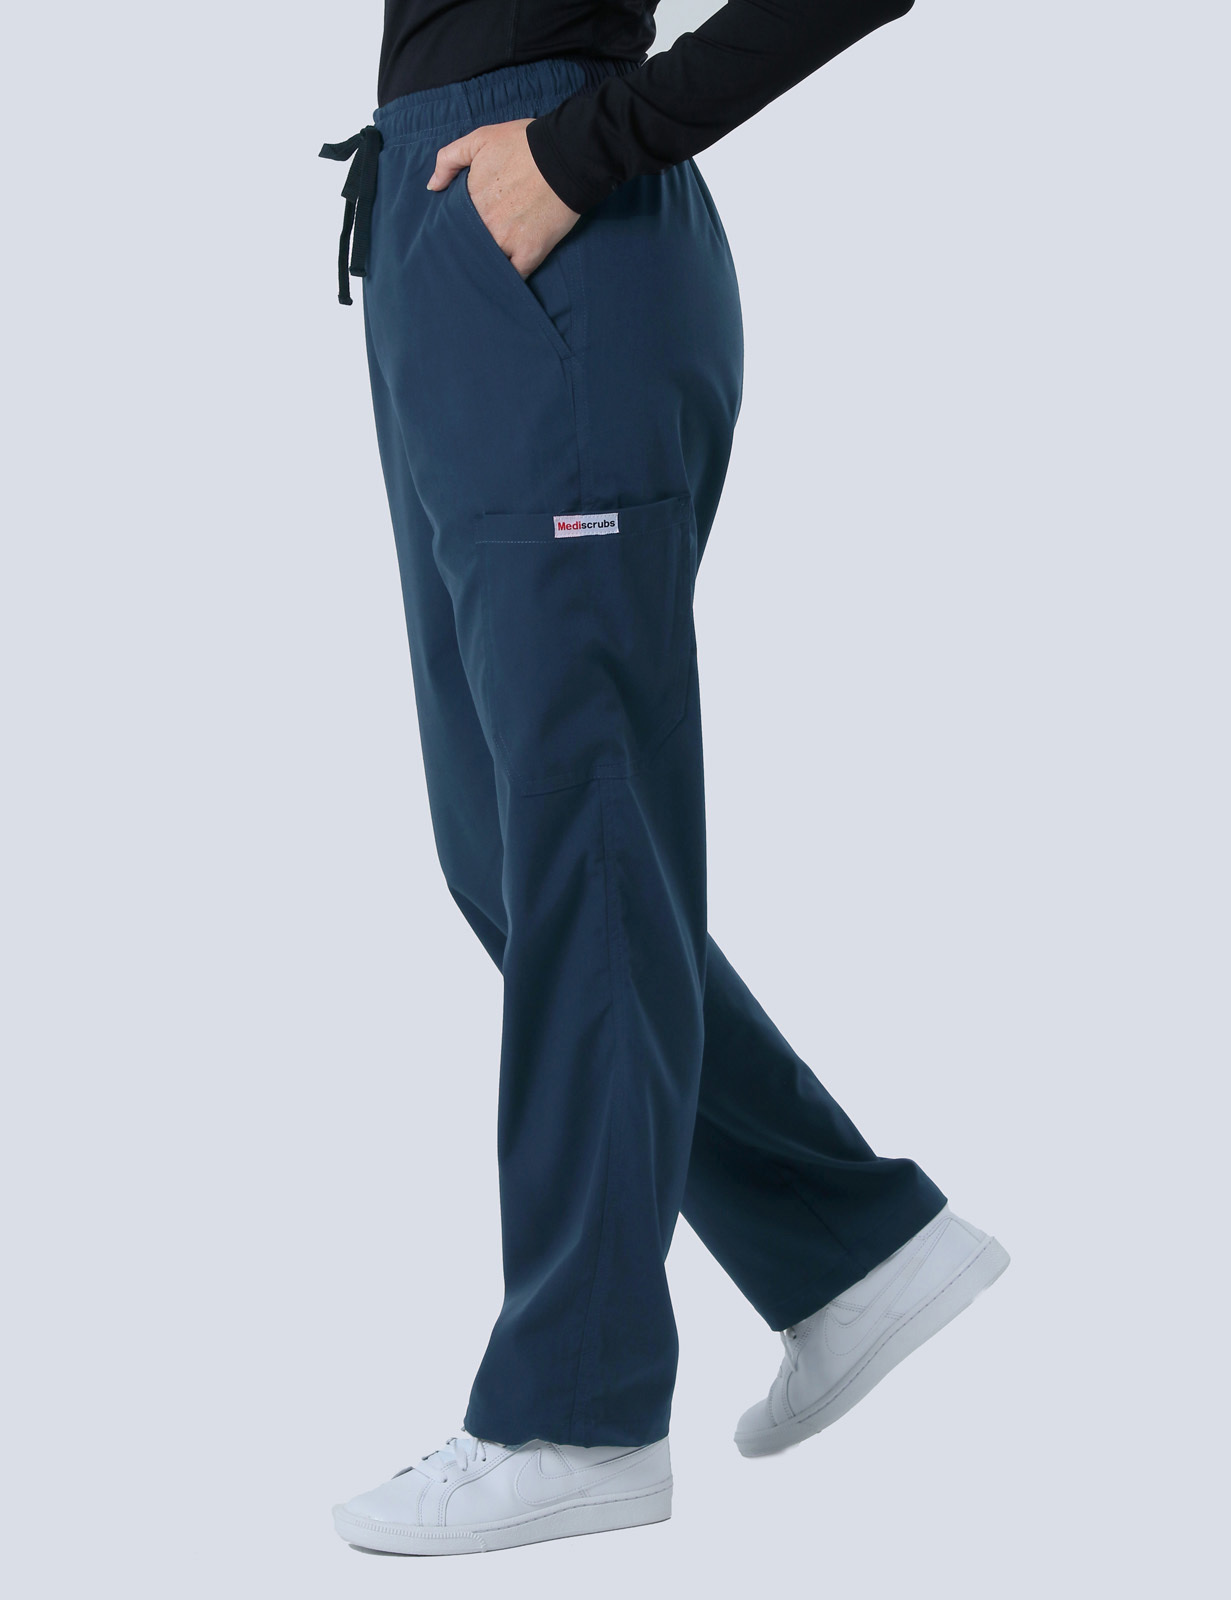 Gympie Hospital - Registered Nurse (4 Pocket Scrub Top and Cargo Pants in Navy incl Logos)